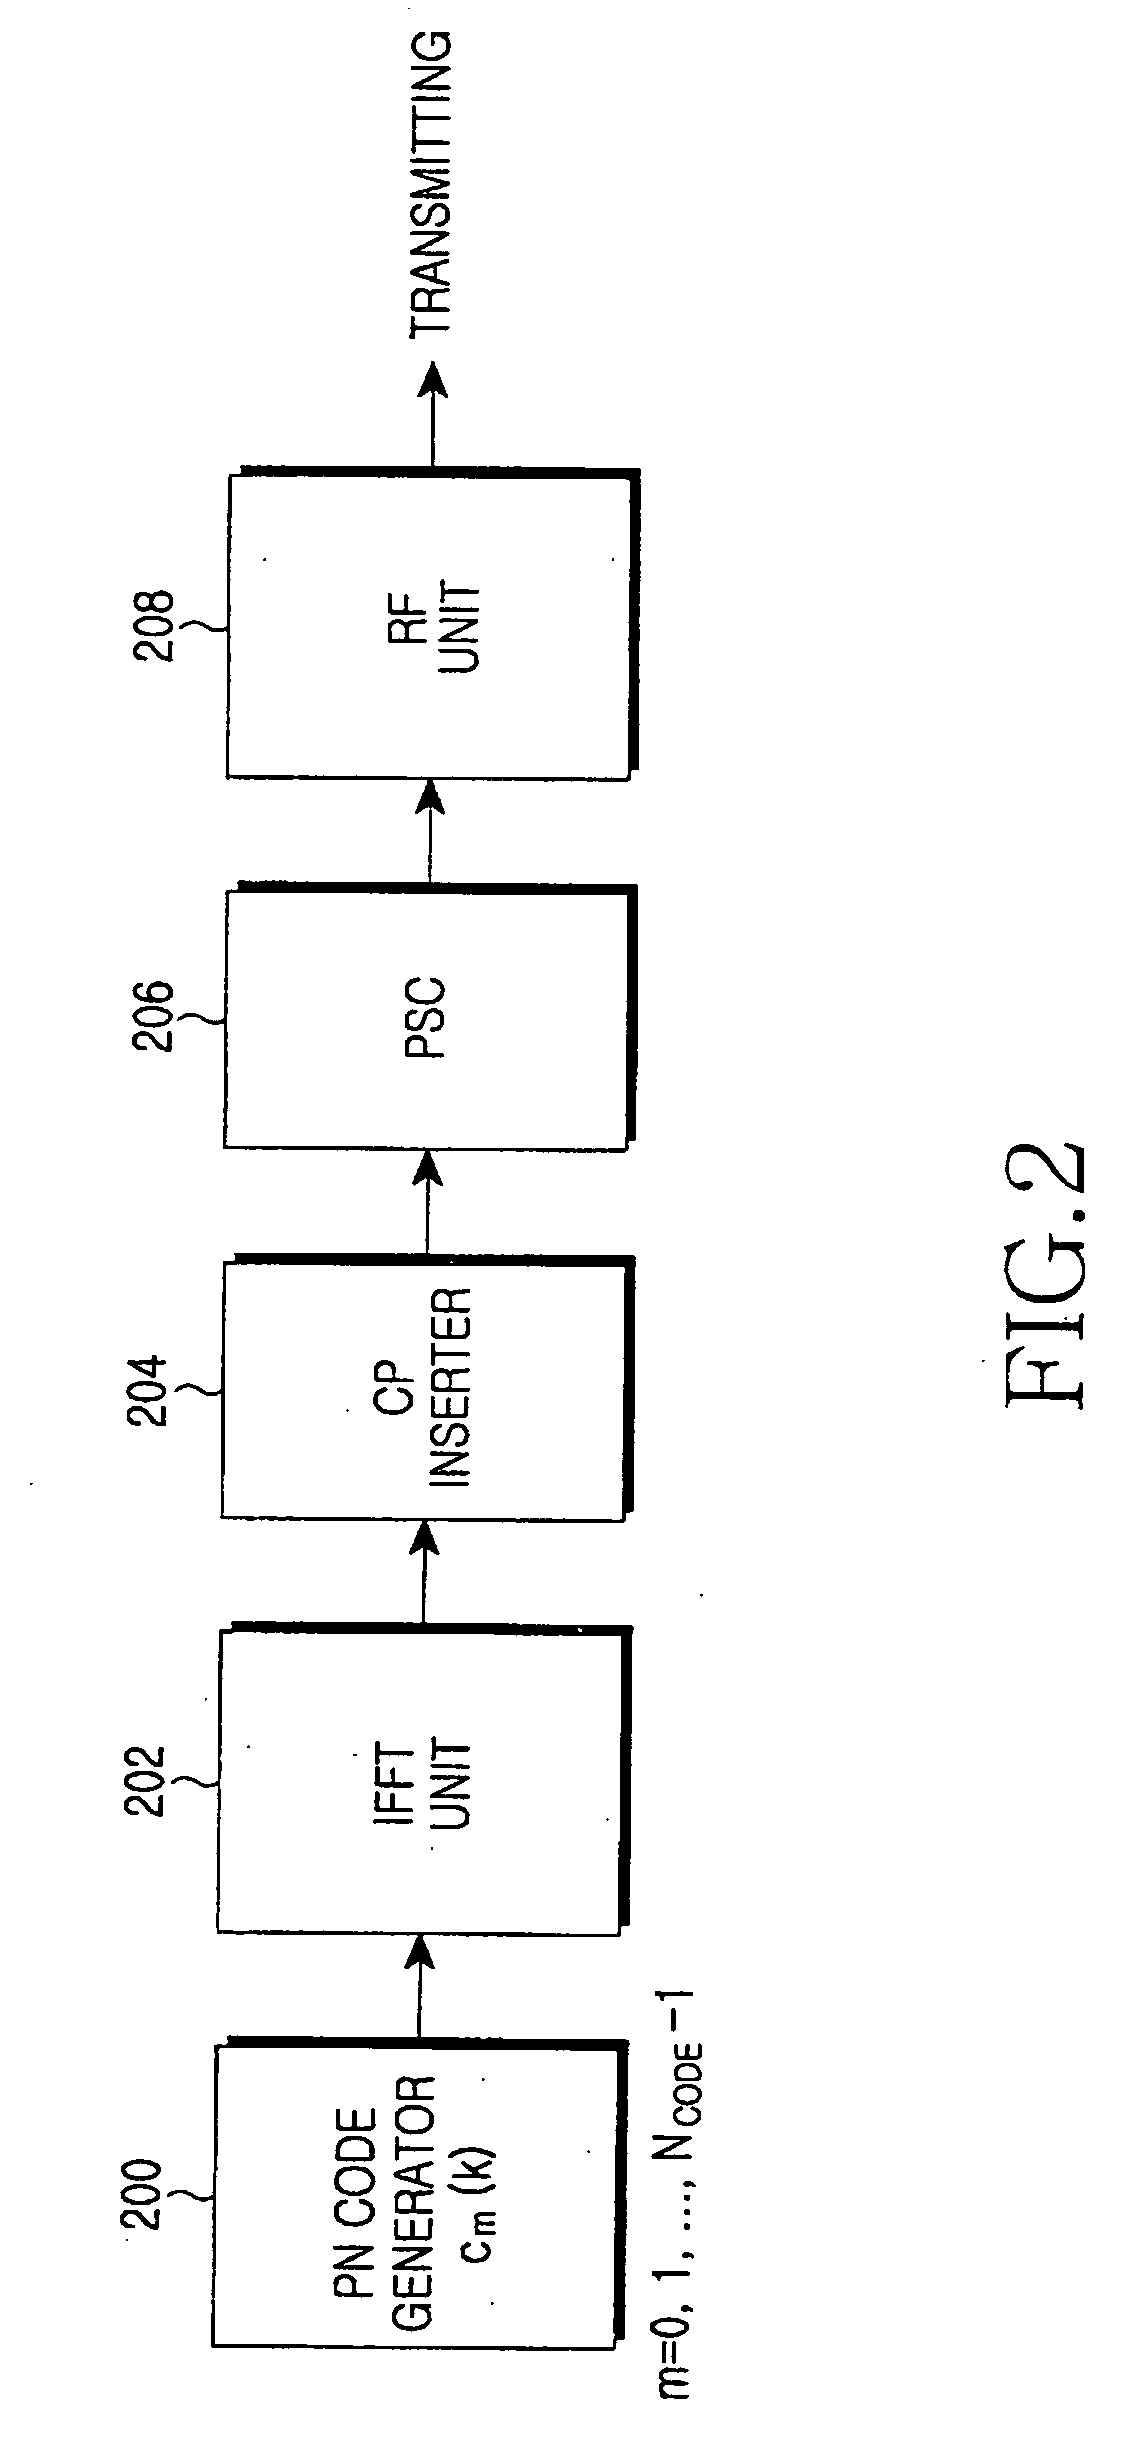 Apparatus and method for transmitting a preamble and searching a cell in an OFDMA system